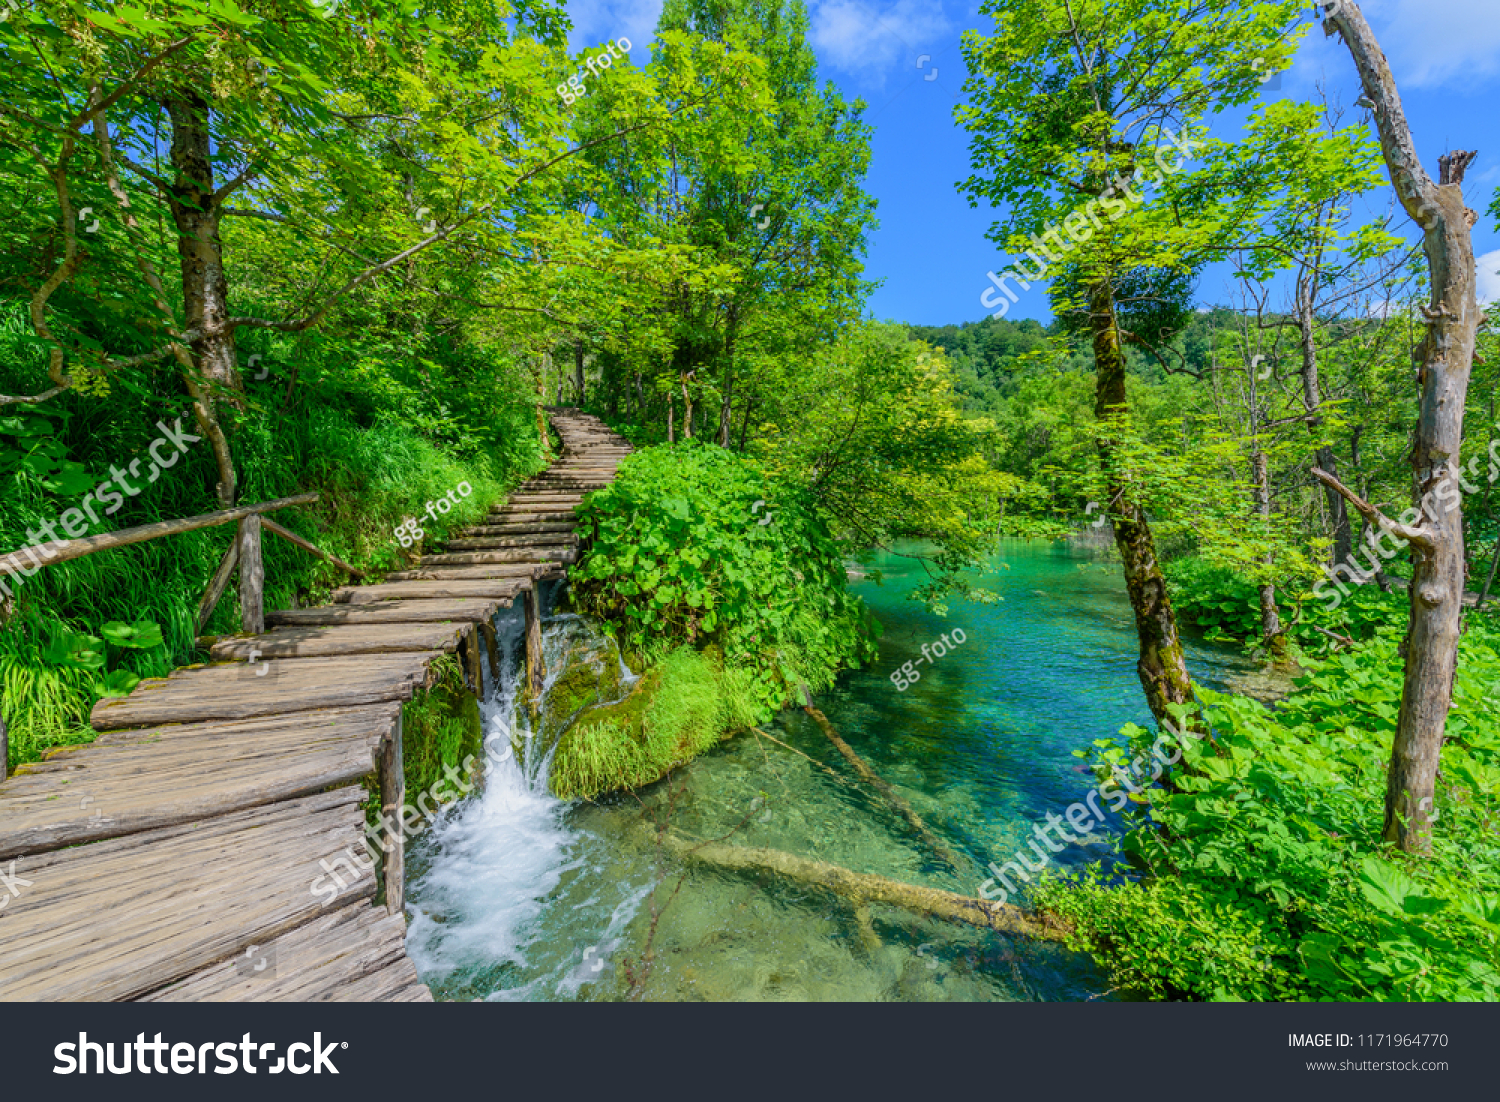 Amazing touristic wooden pathway in the colorful deep forest with clean lakes and spectacular waterfalls, Plitvice National Park, Croatia #1171964770